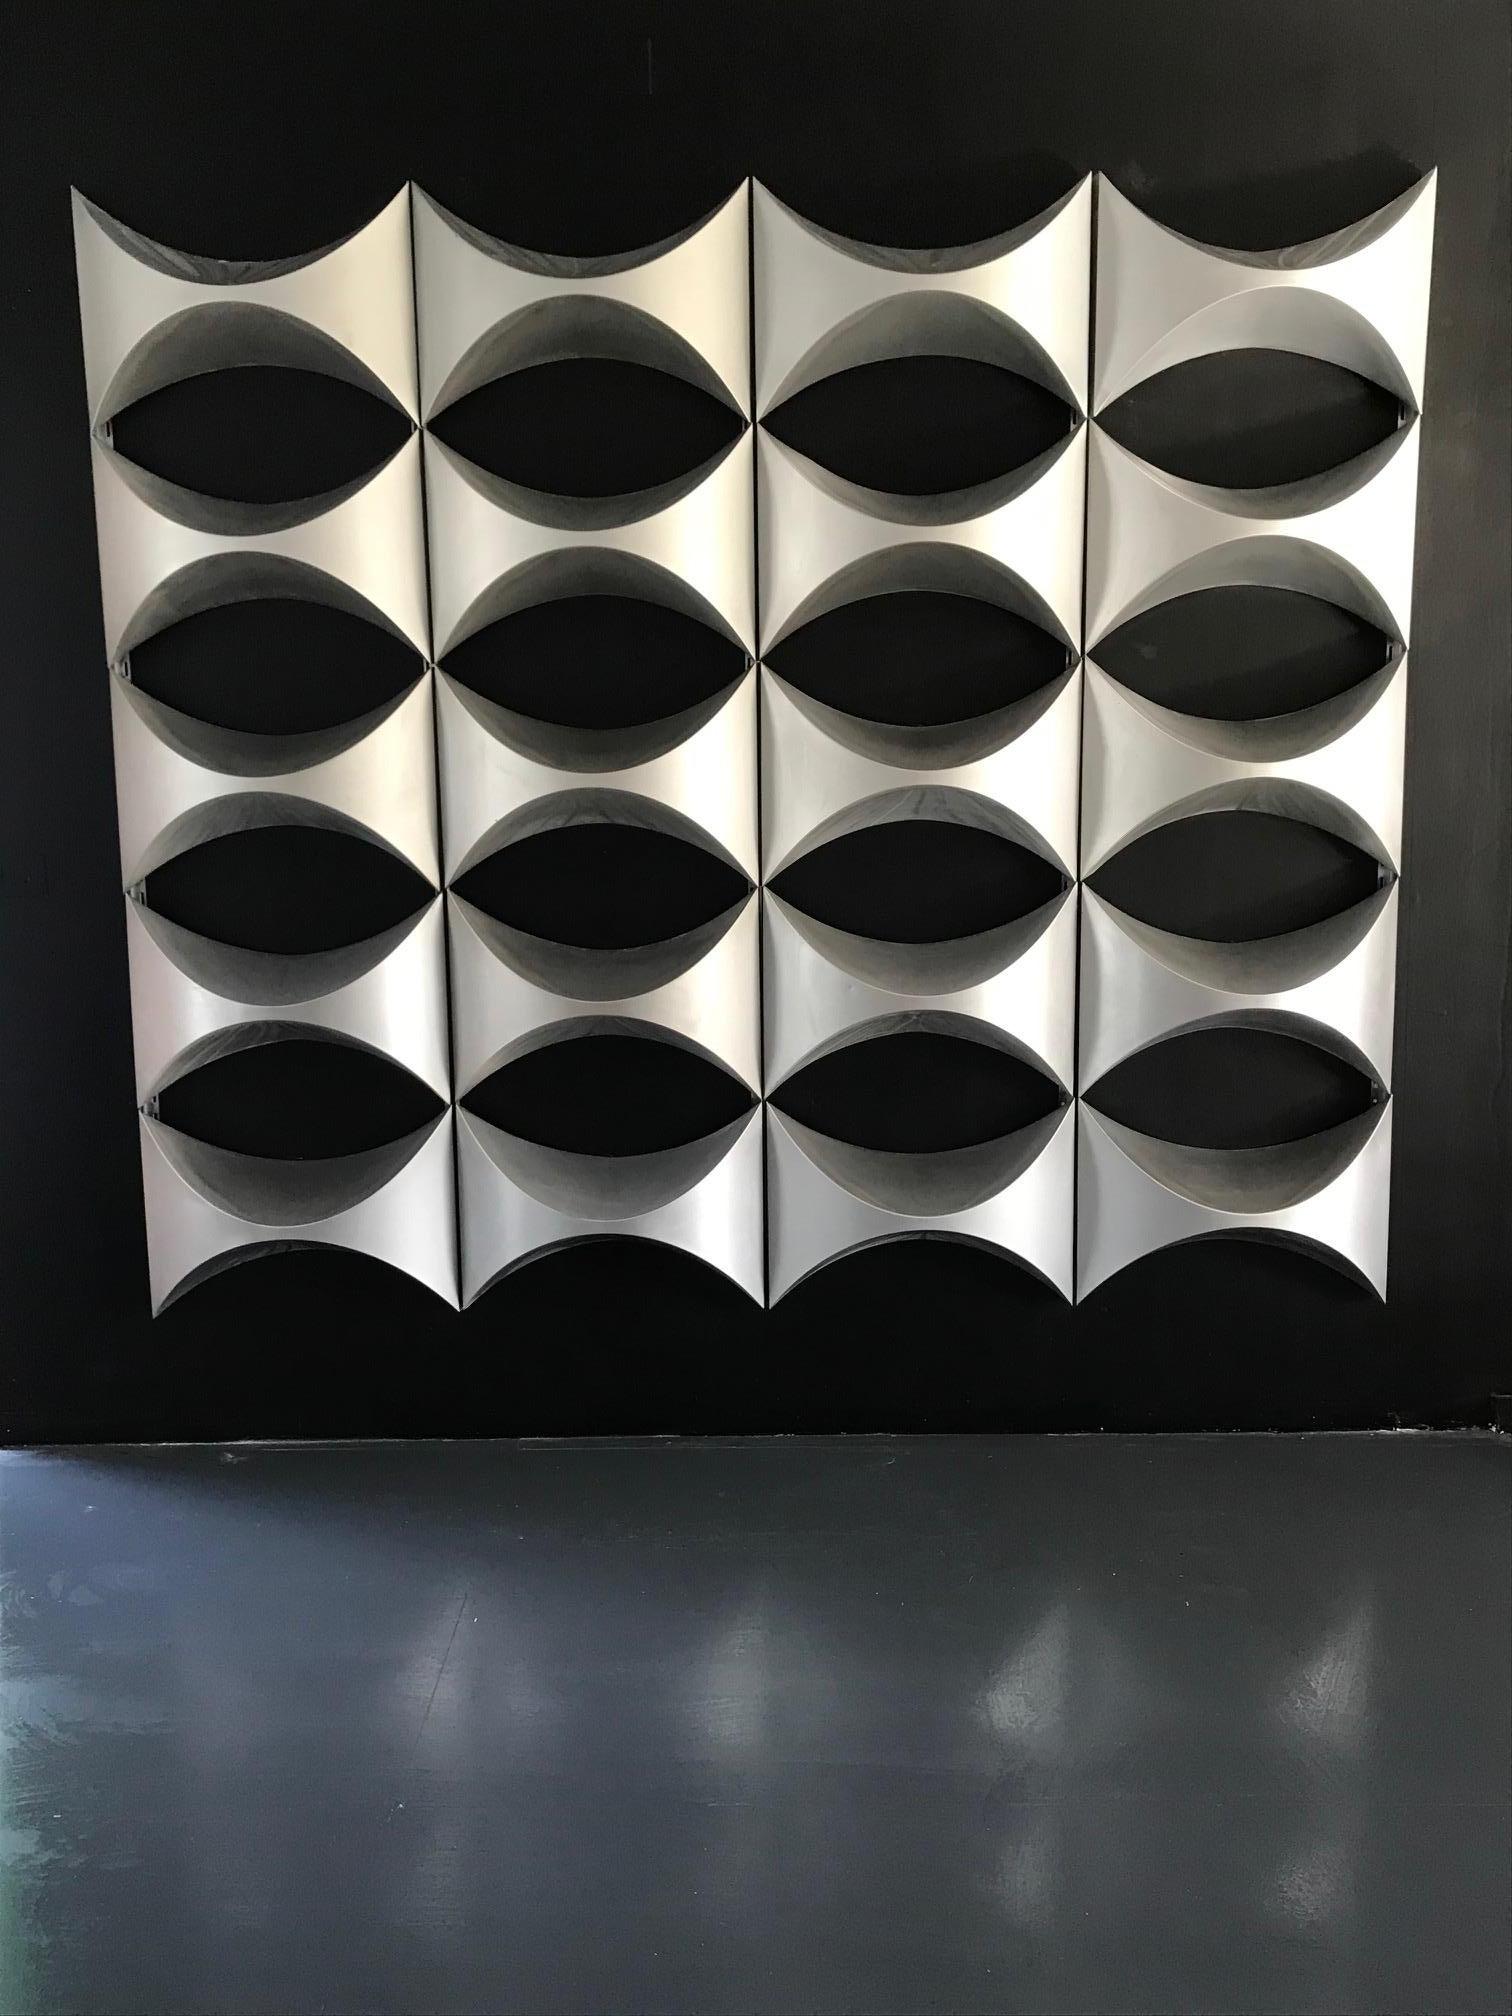 Monumental decorative wall panel, element of French architecture 1970.
This panel is made up of 20 polished aluminum modules. They come from a building facade. 

The Study Center Egg was created in 1962, passage Du Guesclin in Paris. It is a